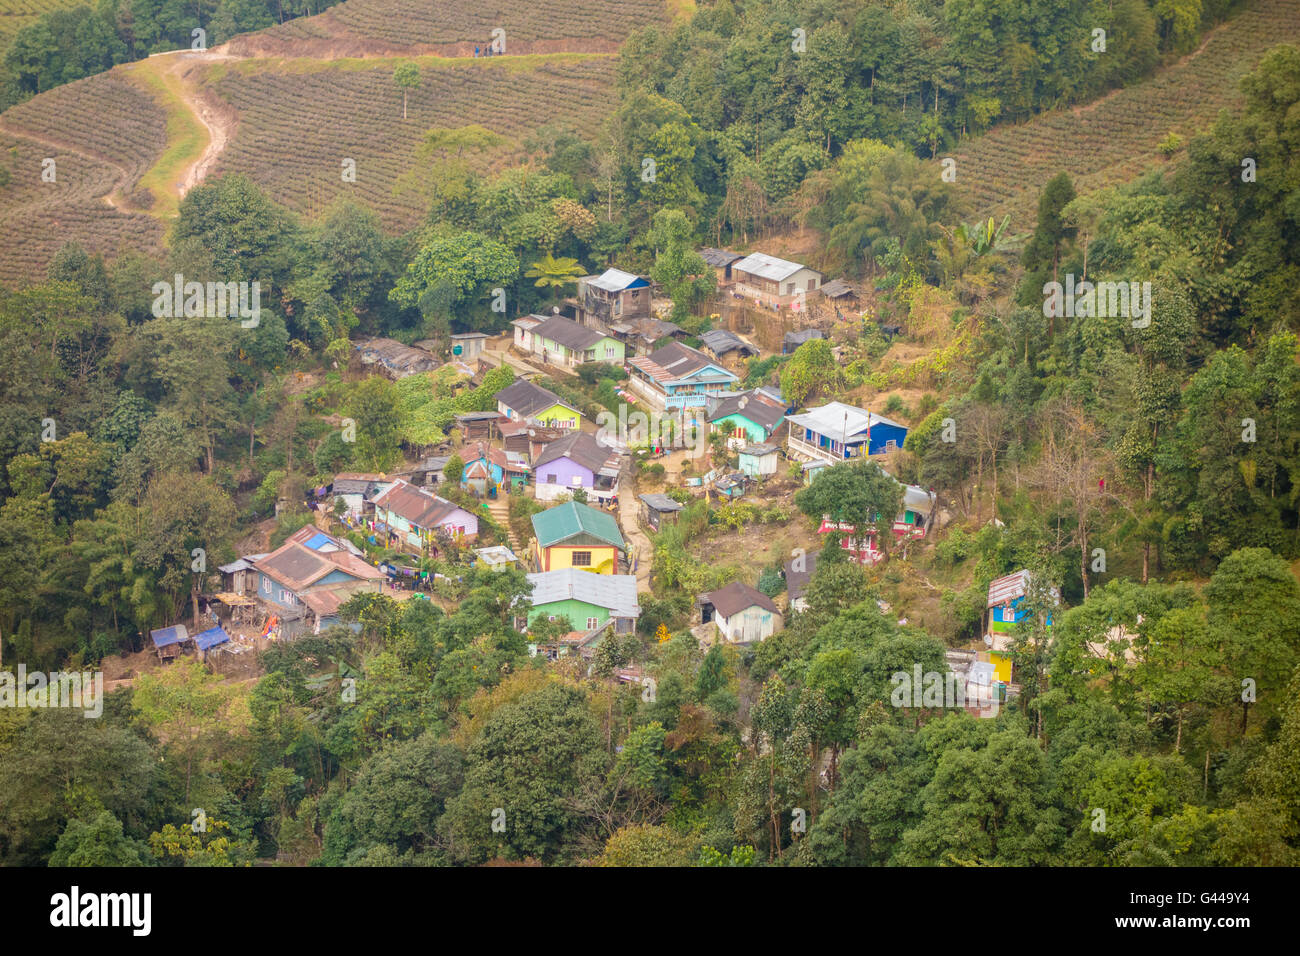 Cluster of houses as seen from Happy Valley Tea Estate, Darjeeling, West Bengal, India. Stock Photo